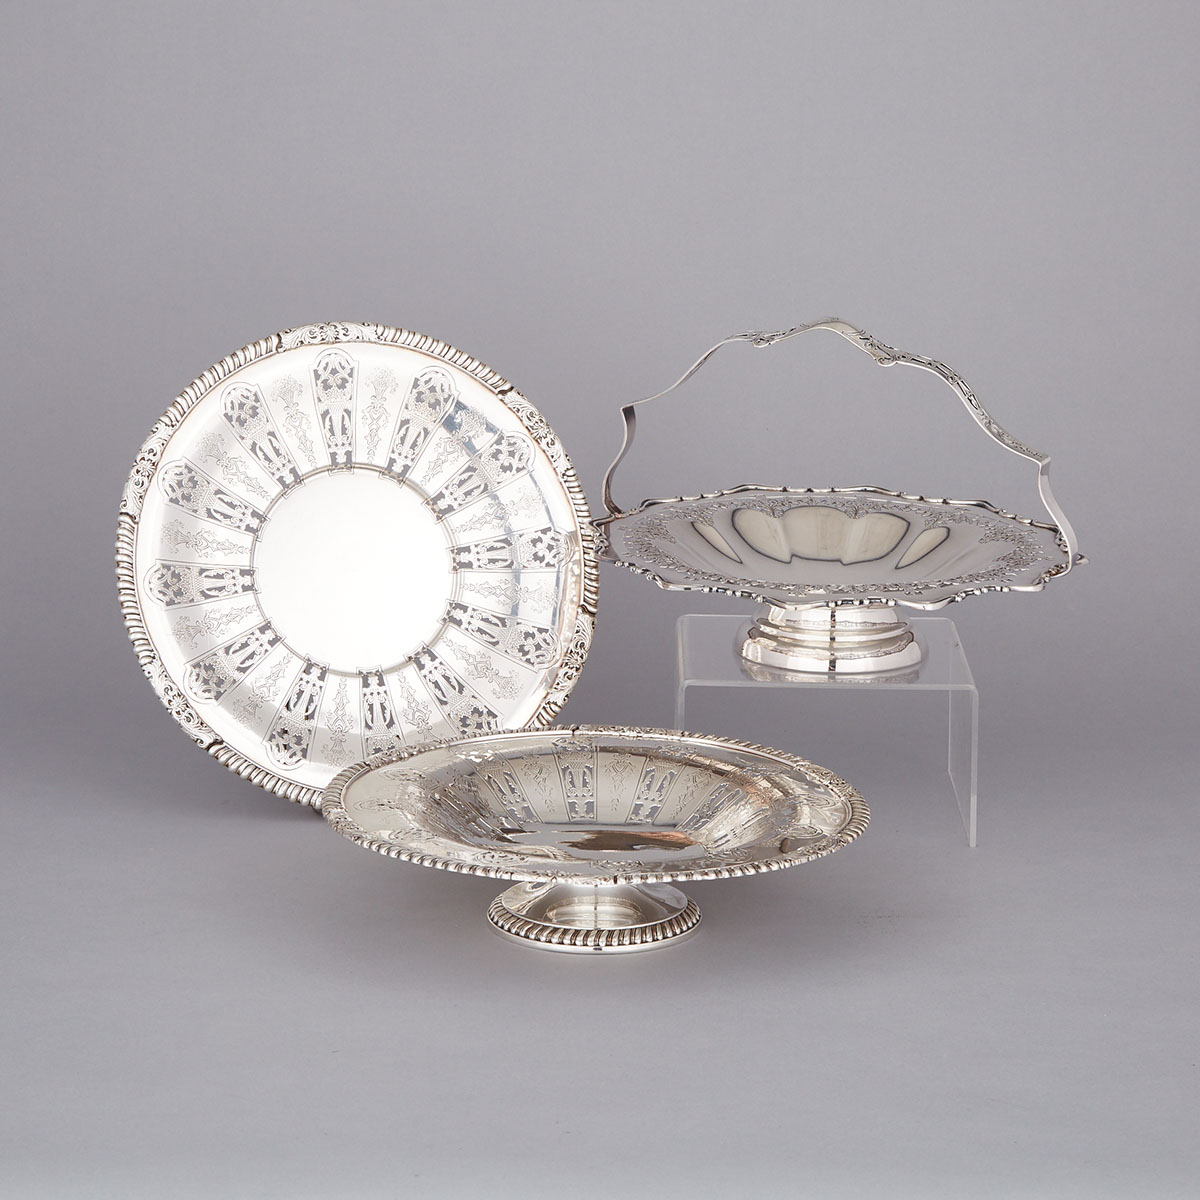 Canadian Silver Pierced Cake Basket, Low Comport and a Circular Dish, Roden Brothers, Toronto, Ont., early 20th century